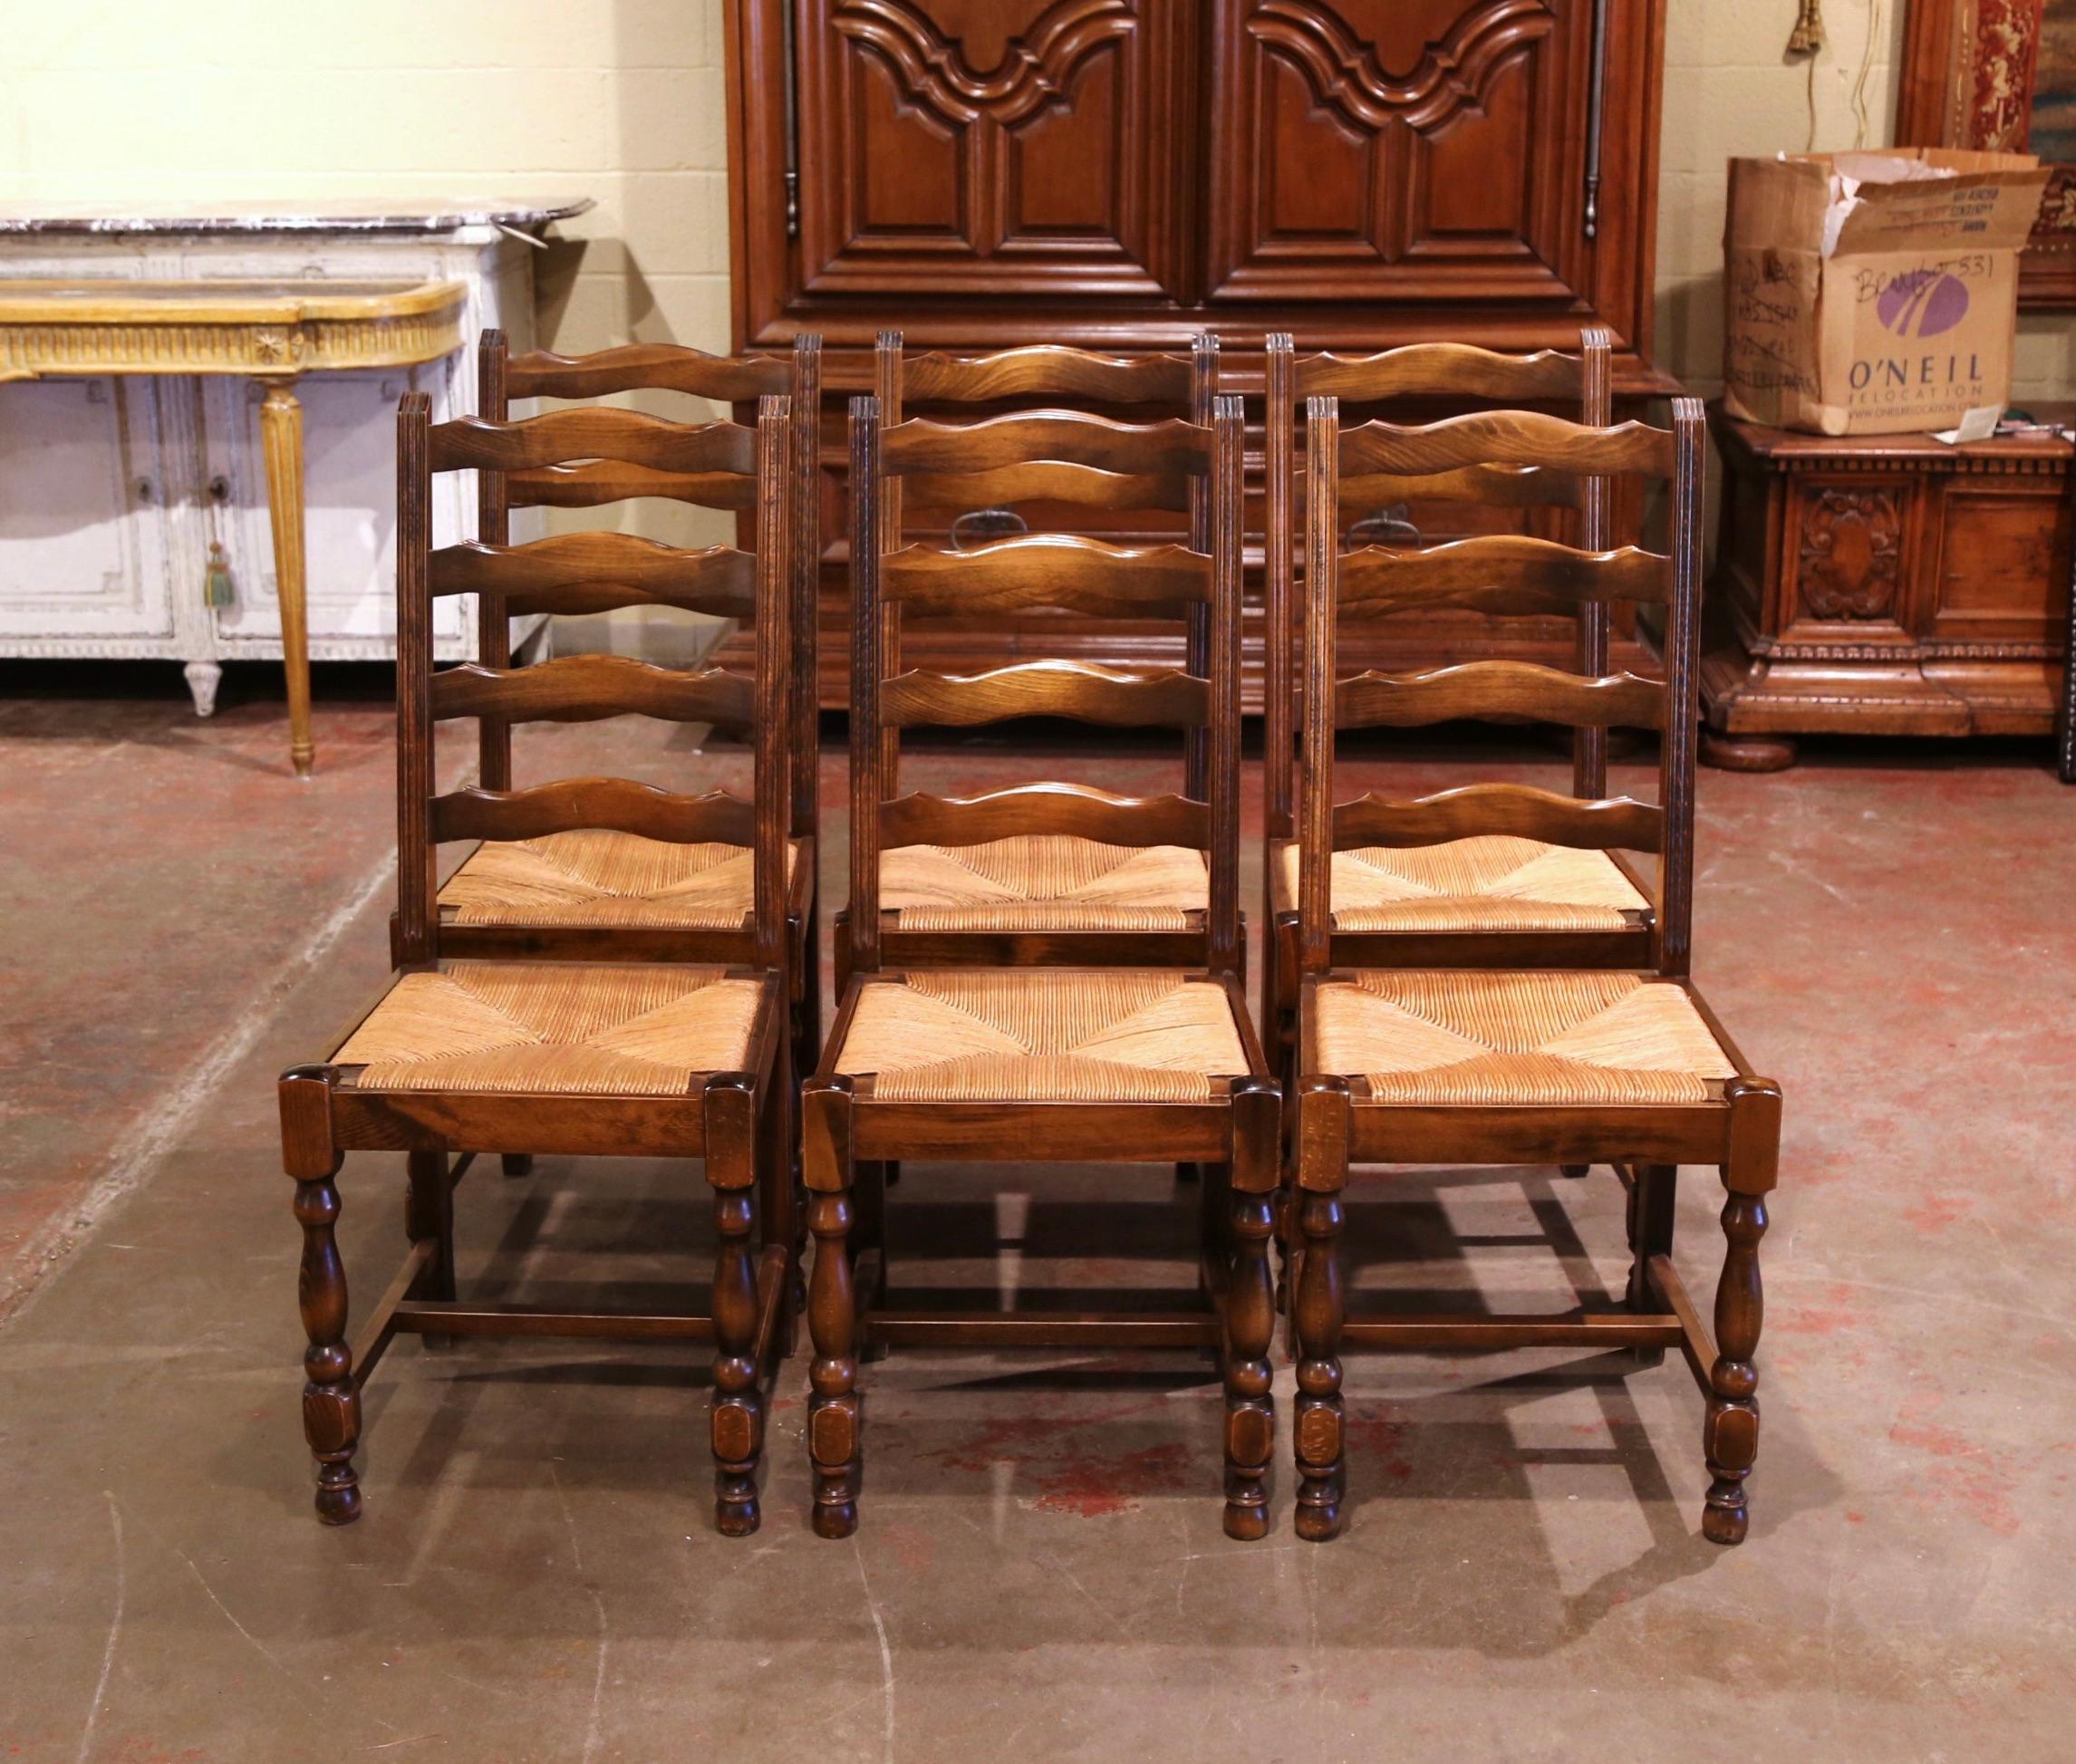 This elegant set of country chairs was crafted in France, circa 1980. Carved from solid oak, each chair stands on front turned legs, and has four carved and scalloped ladders across the tall pitched back which give each chair great support. The